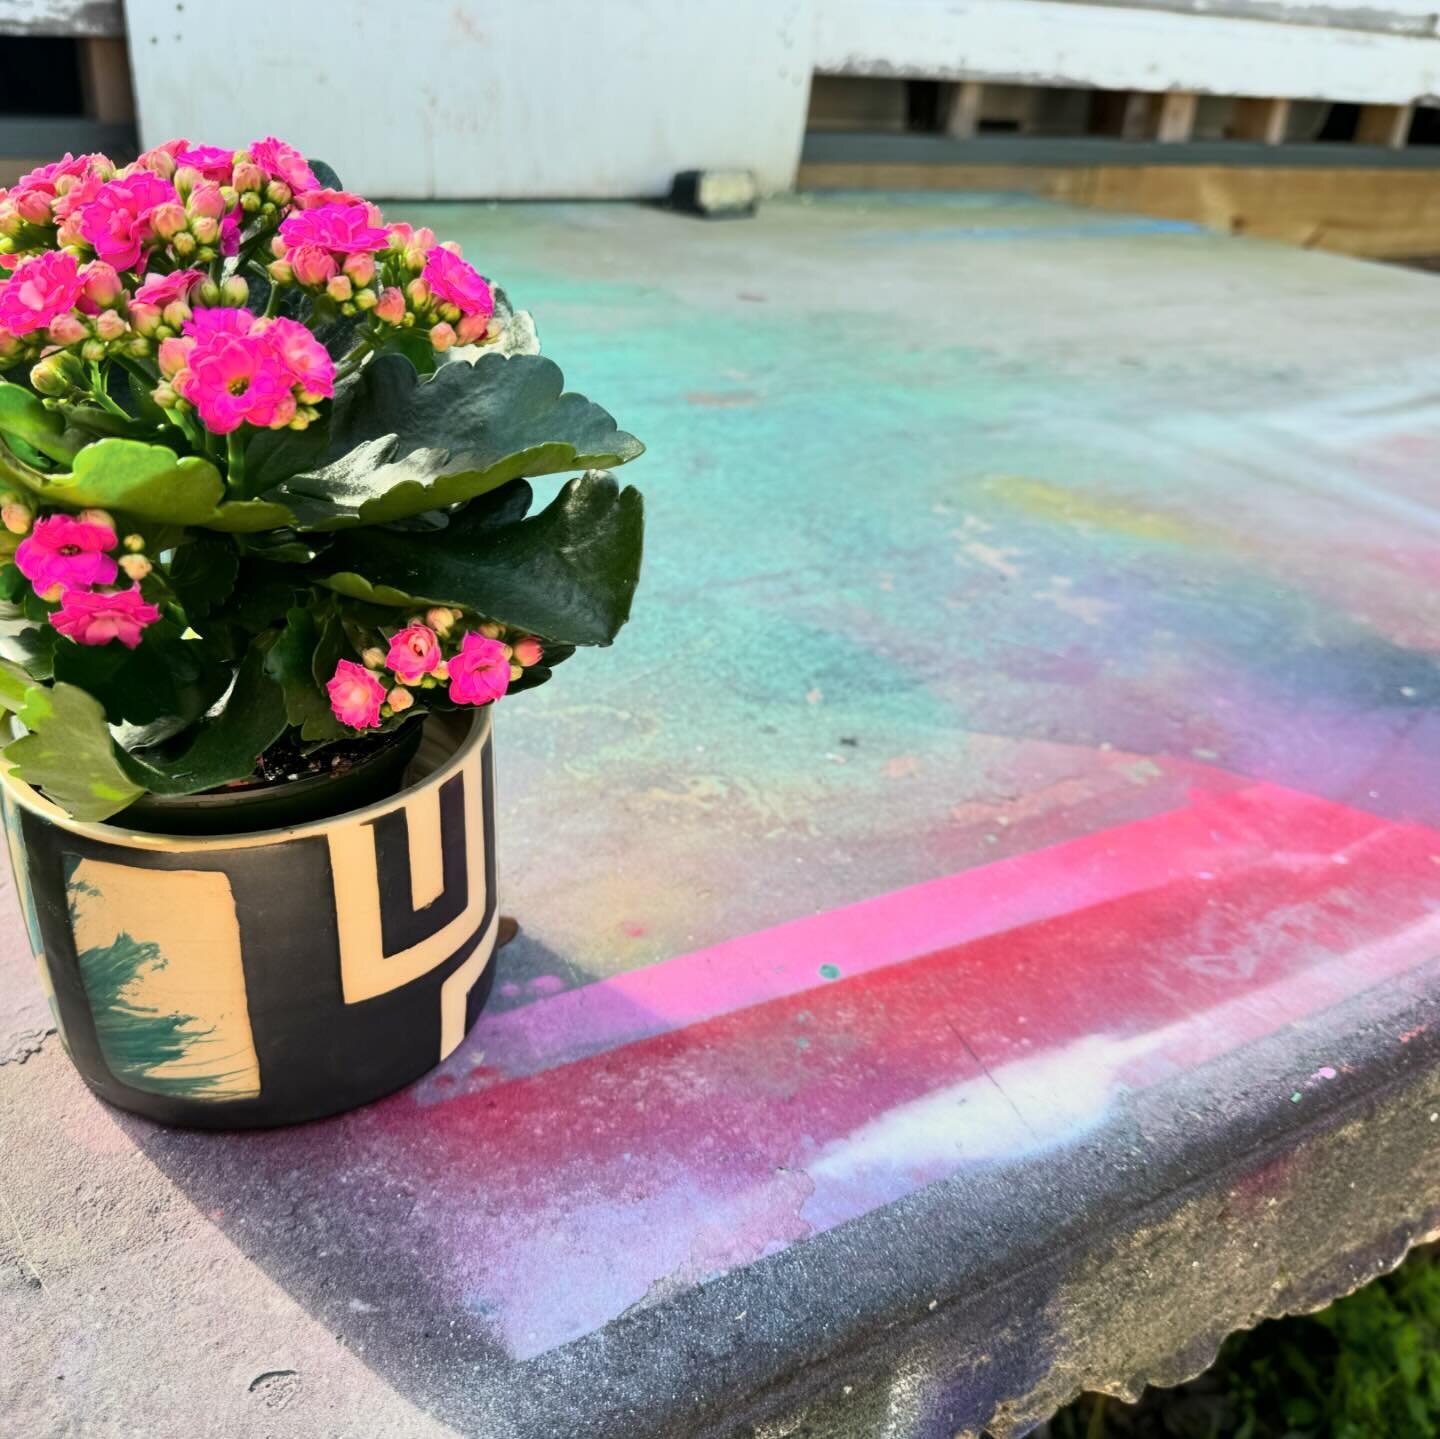 Having fun with planters as spring arrives. I use these minimal forms as a 3D canvas to play with abstract compositions. They combine surface tactics in slip transfer, direct painting in underglaze and taped off linear graphics. Thanks, @mariawhitest